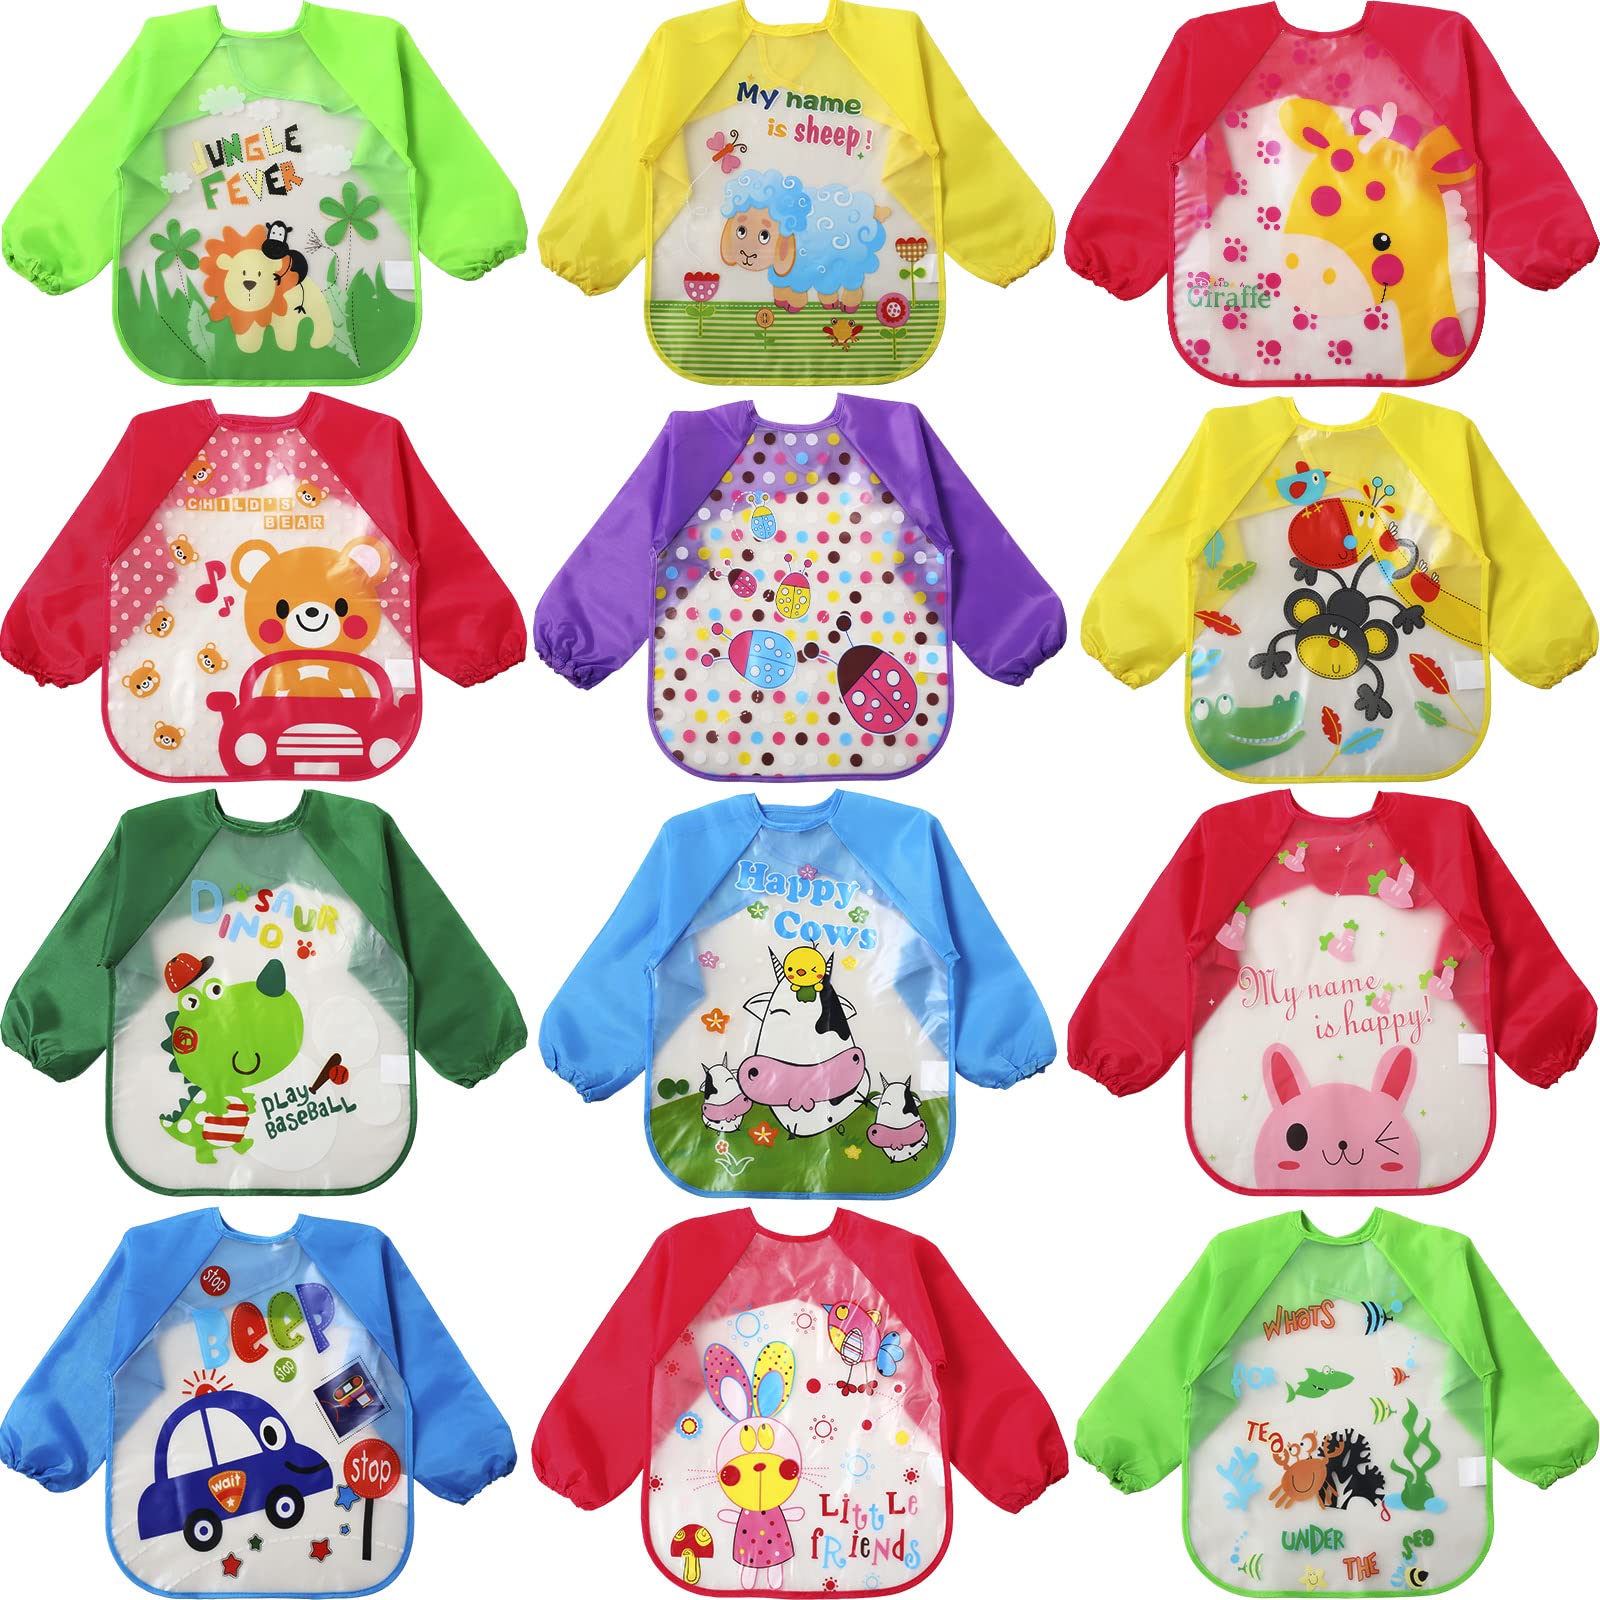 JaGely 12 Pcs Kids Art Smocks Toddler Art Smock Waterproof Kids Painting Aprons Children's Artist Apron with Long Sleeve Washable Bib for Baby Arts and Crafts Supplies Coloring Eating Aged 1-4 Years